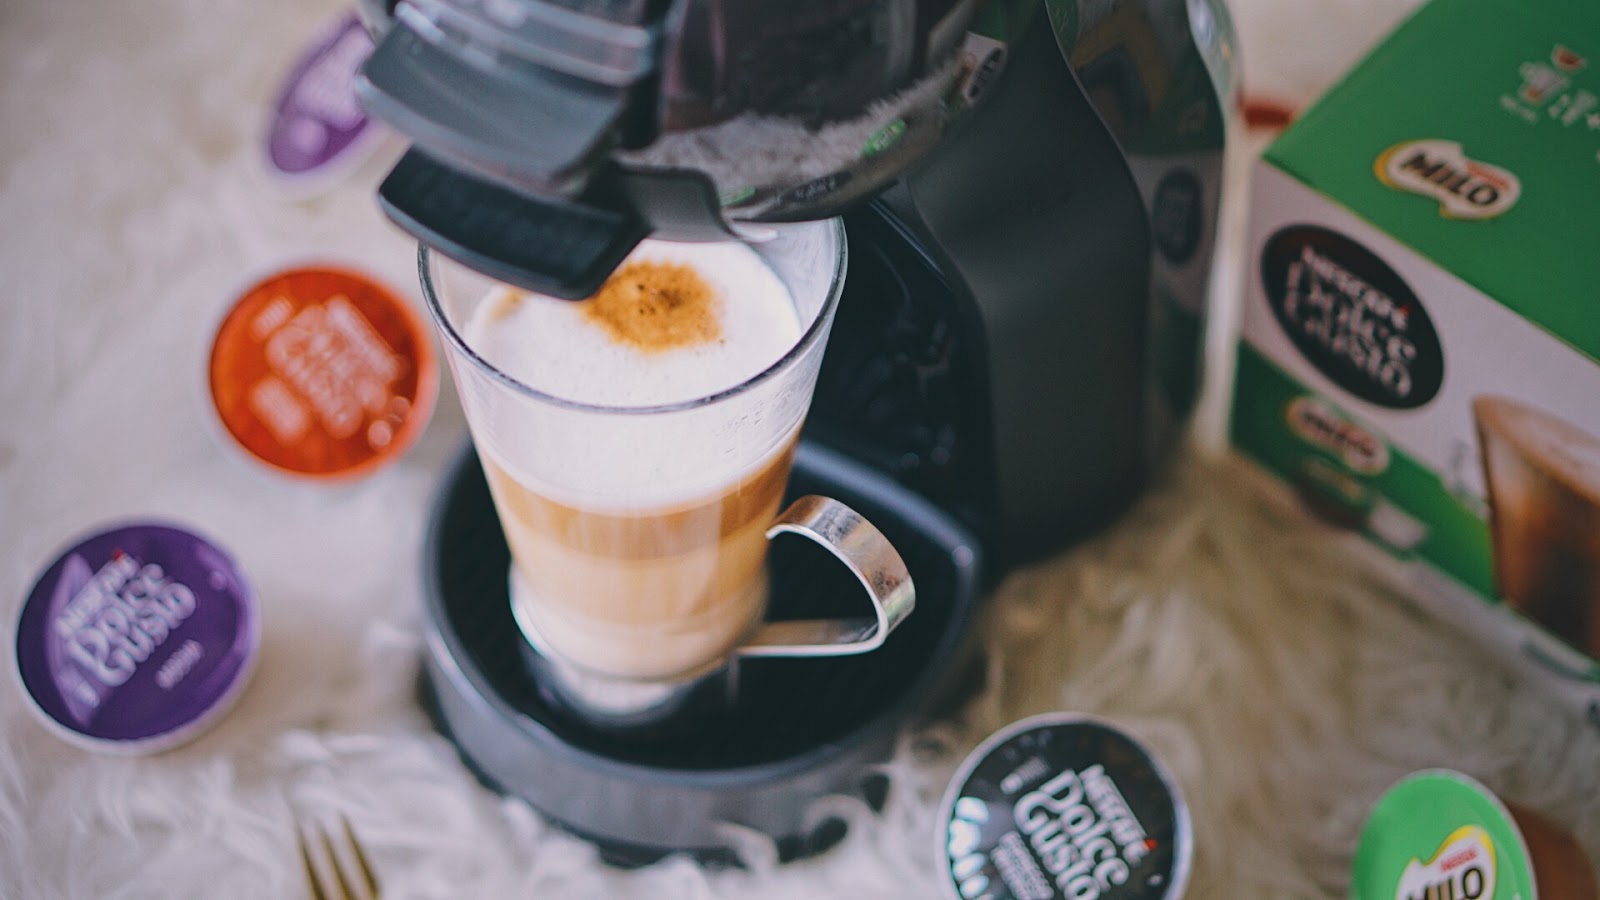 Nescafe Dolce Gusto Specialty Coffee Machine Review - Mommy Kat and Kids